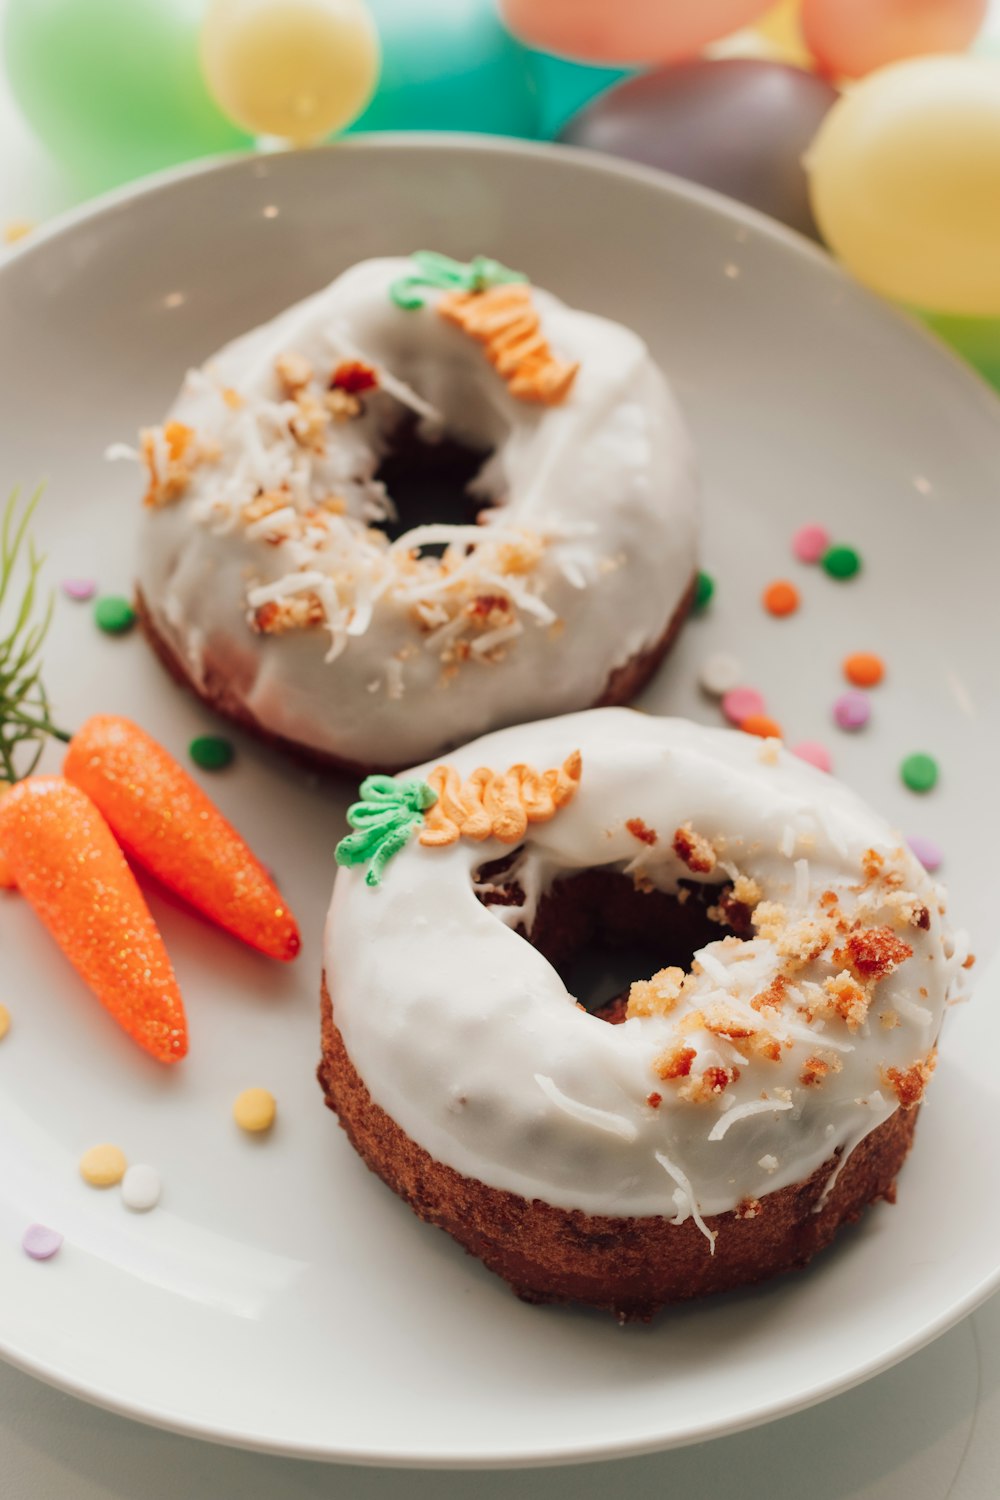 two glazed donuts with icing and sprinkles on a plate